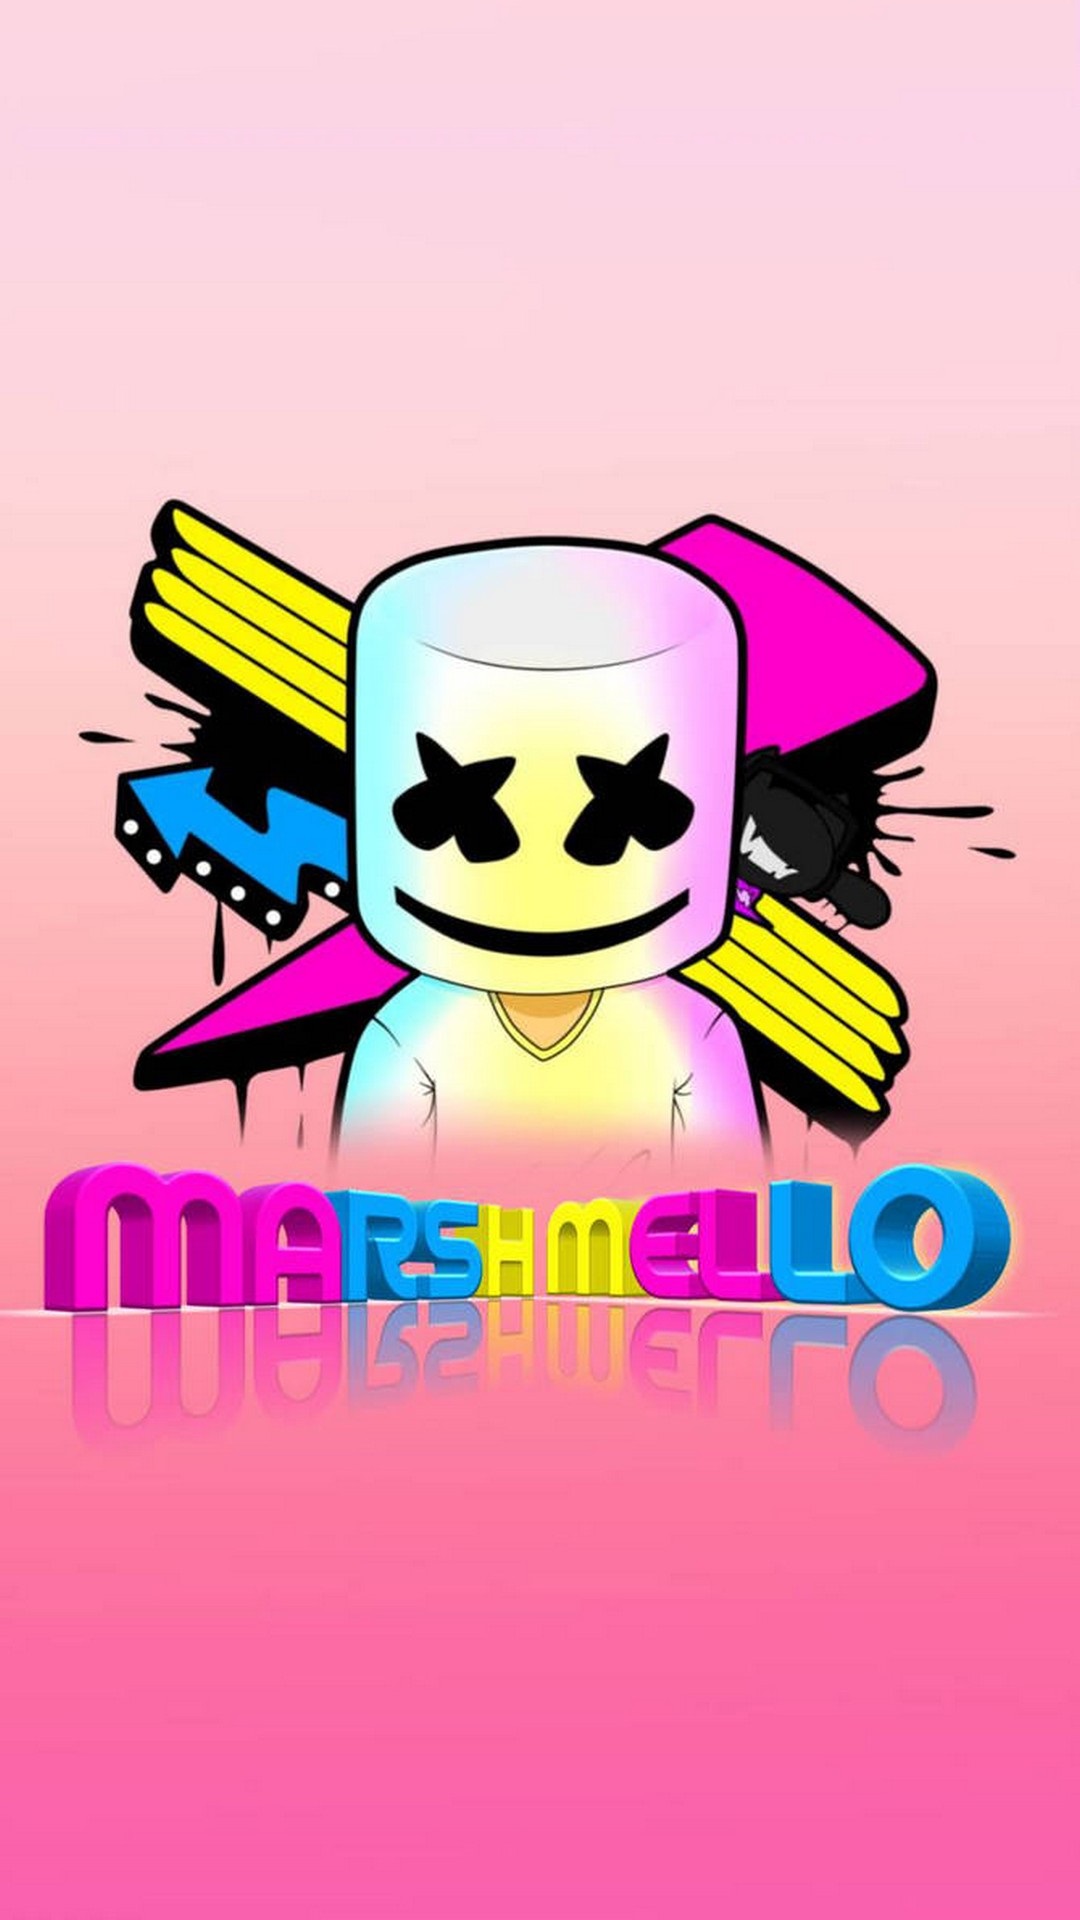 Marshmello iPhone Wallpaper Lock Screen With high-resolution 1080X1920 pixel. You can set as wallpaper for Apple iPhone X, XS Max, XR, 8, 7, 6, SE, iPad. Enjoy and share your favorite HD wallpapers and background images